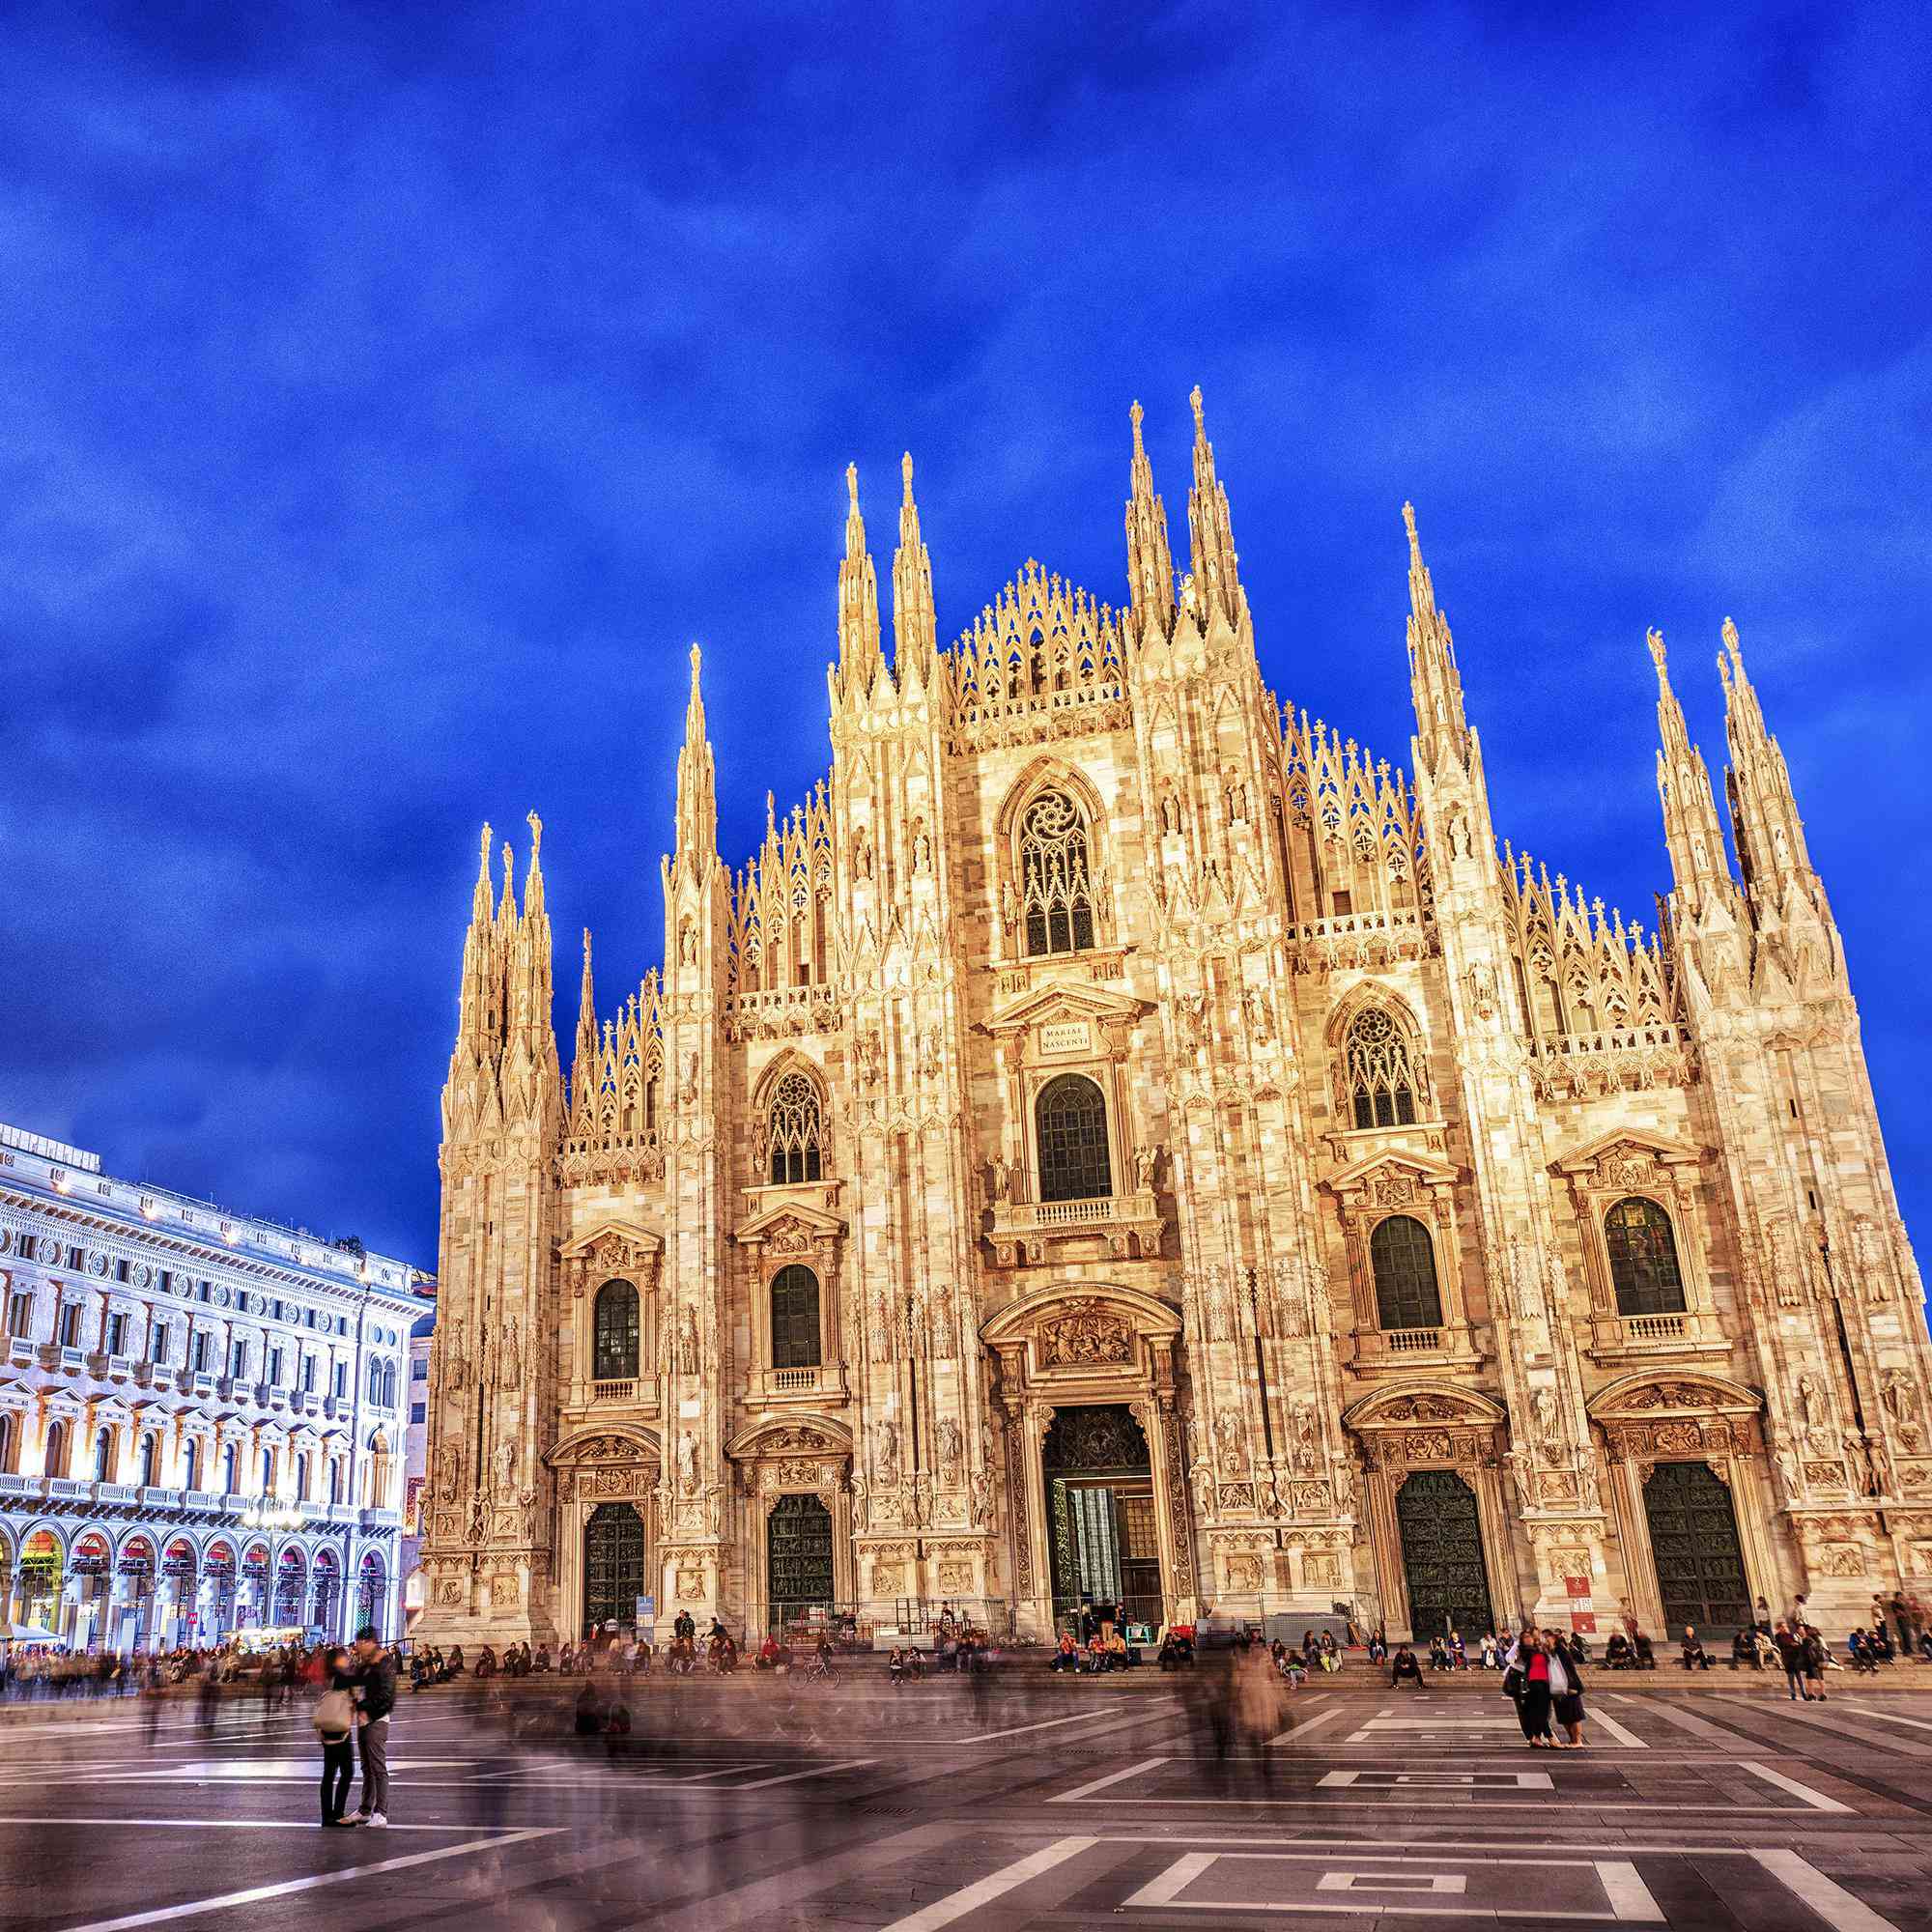 San Francisco to Milan Itlay for $450 RT Airfares on SAS (Scandinavian Airlines) Go Light (Flexible Ticket Travel August - October 2022)